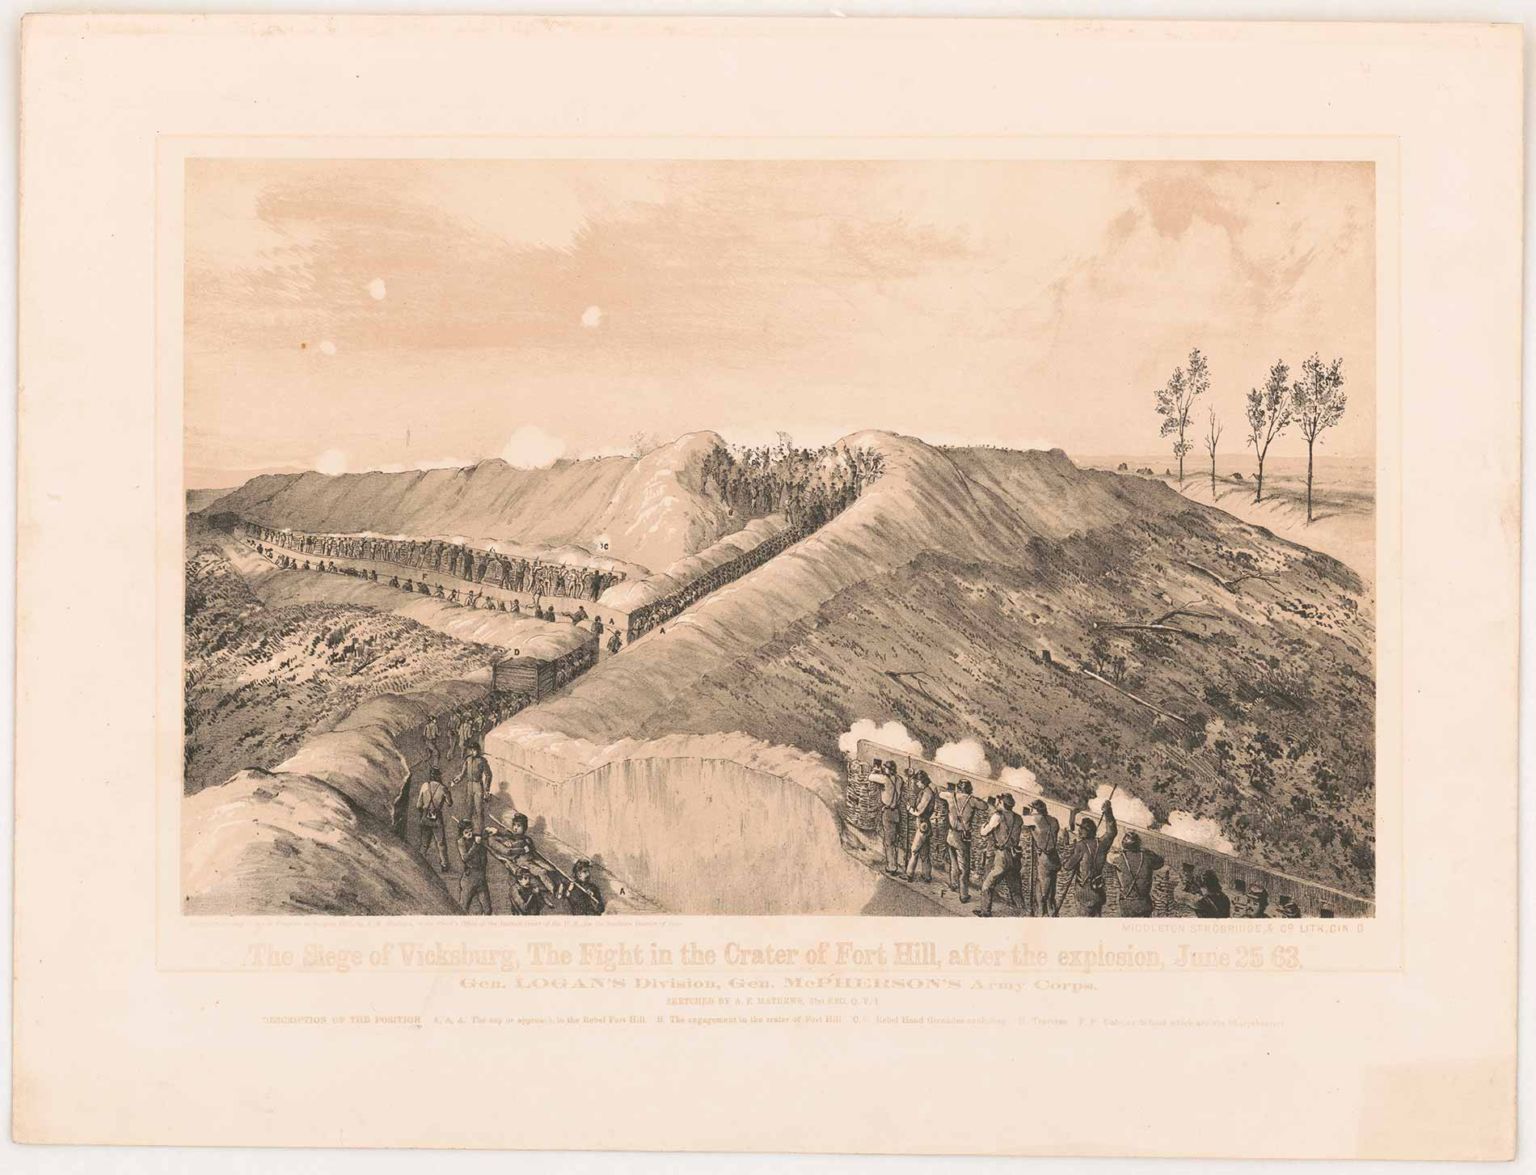 Union soldiers in trench and behind wooden walls and gabions as an assault is made on Fort Hill during the siege of Vicksburg, Mississippi. Includes a "description of the position" with a key that identifies troop positions and prominent features by letter.